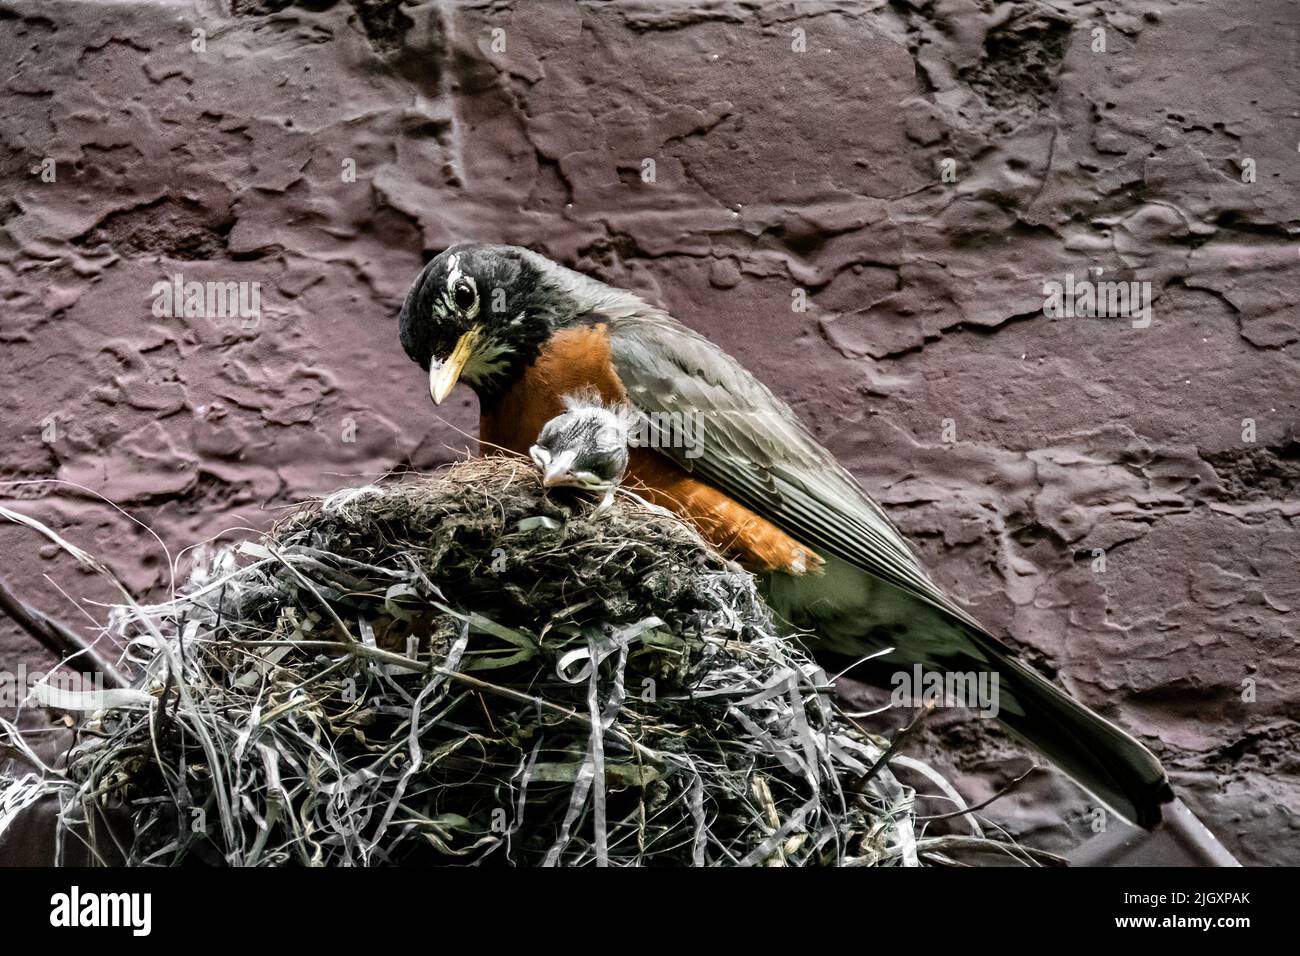 Wild Adult American Robin, Turdus migratorius, with a tiny fledgling in the nest in a courtyard in New York City, NY, United States Stock Photo